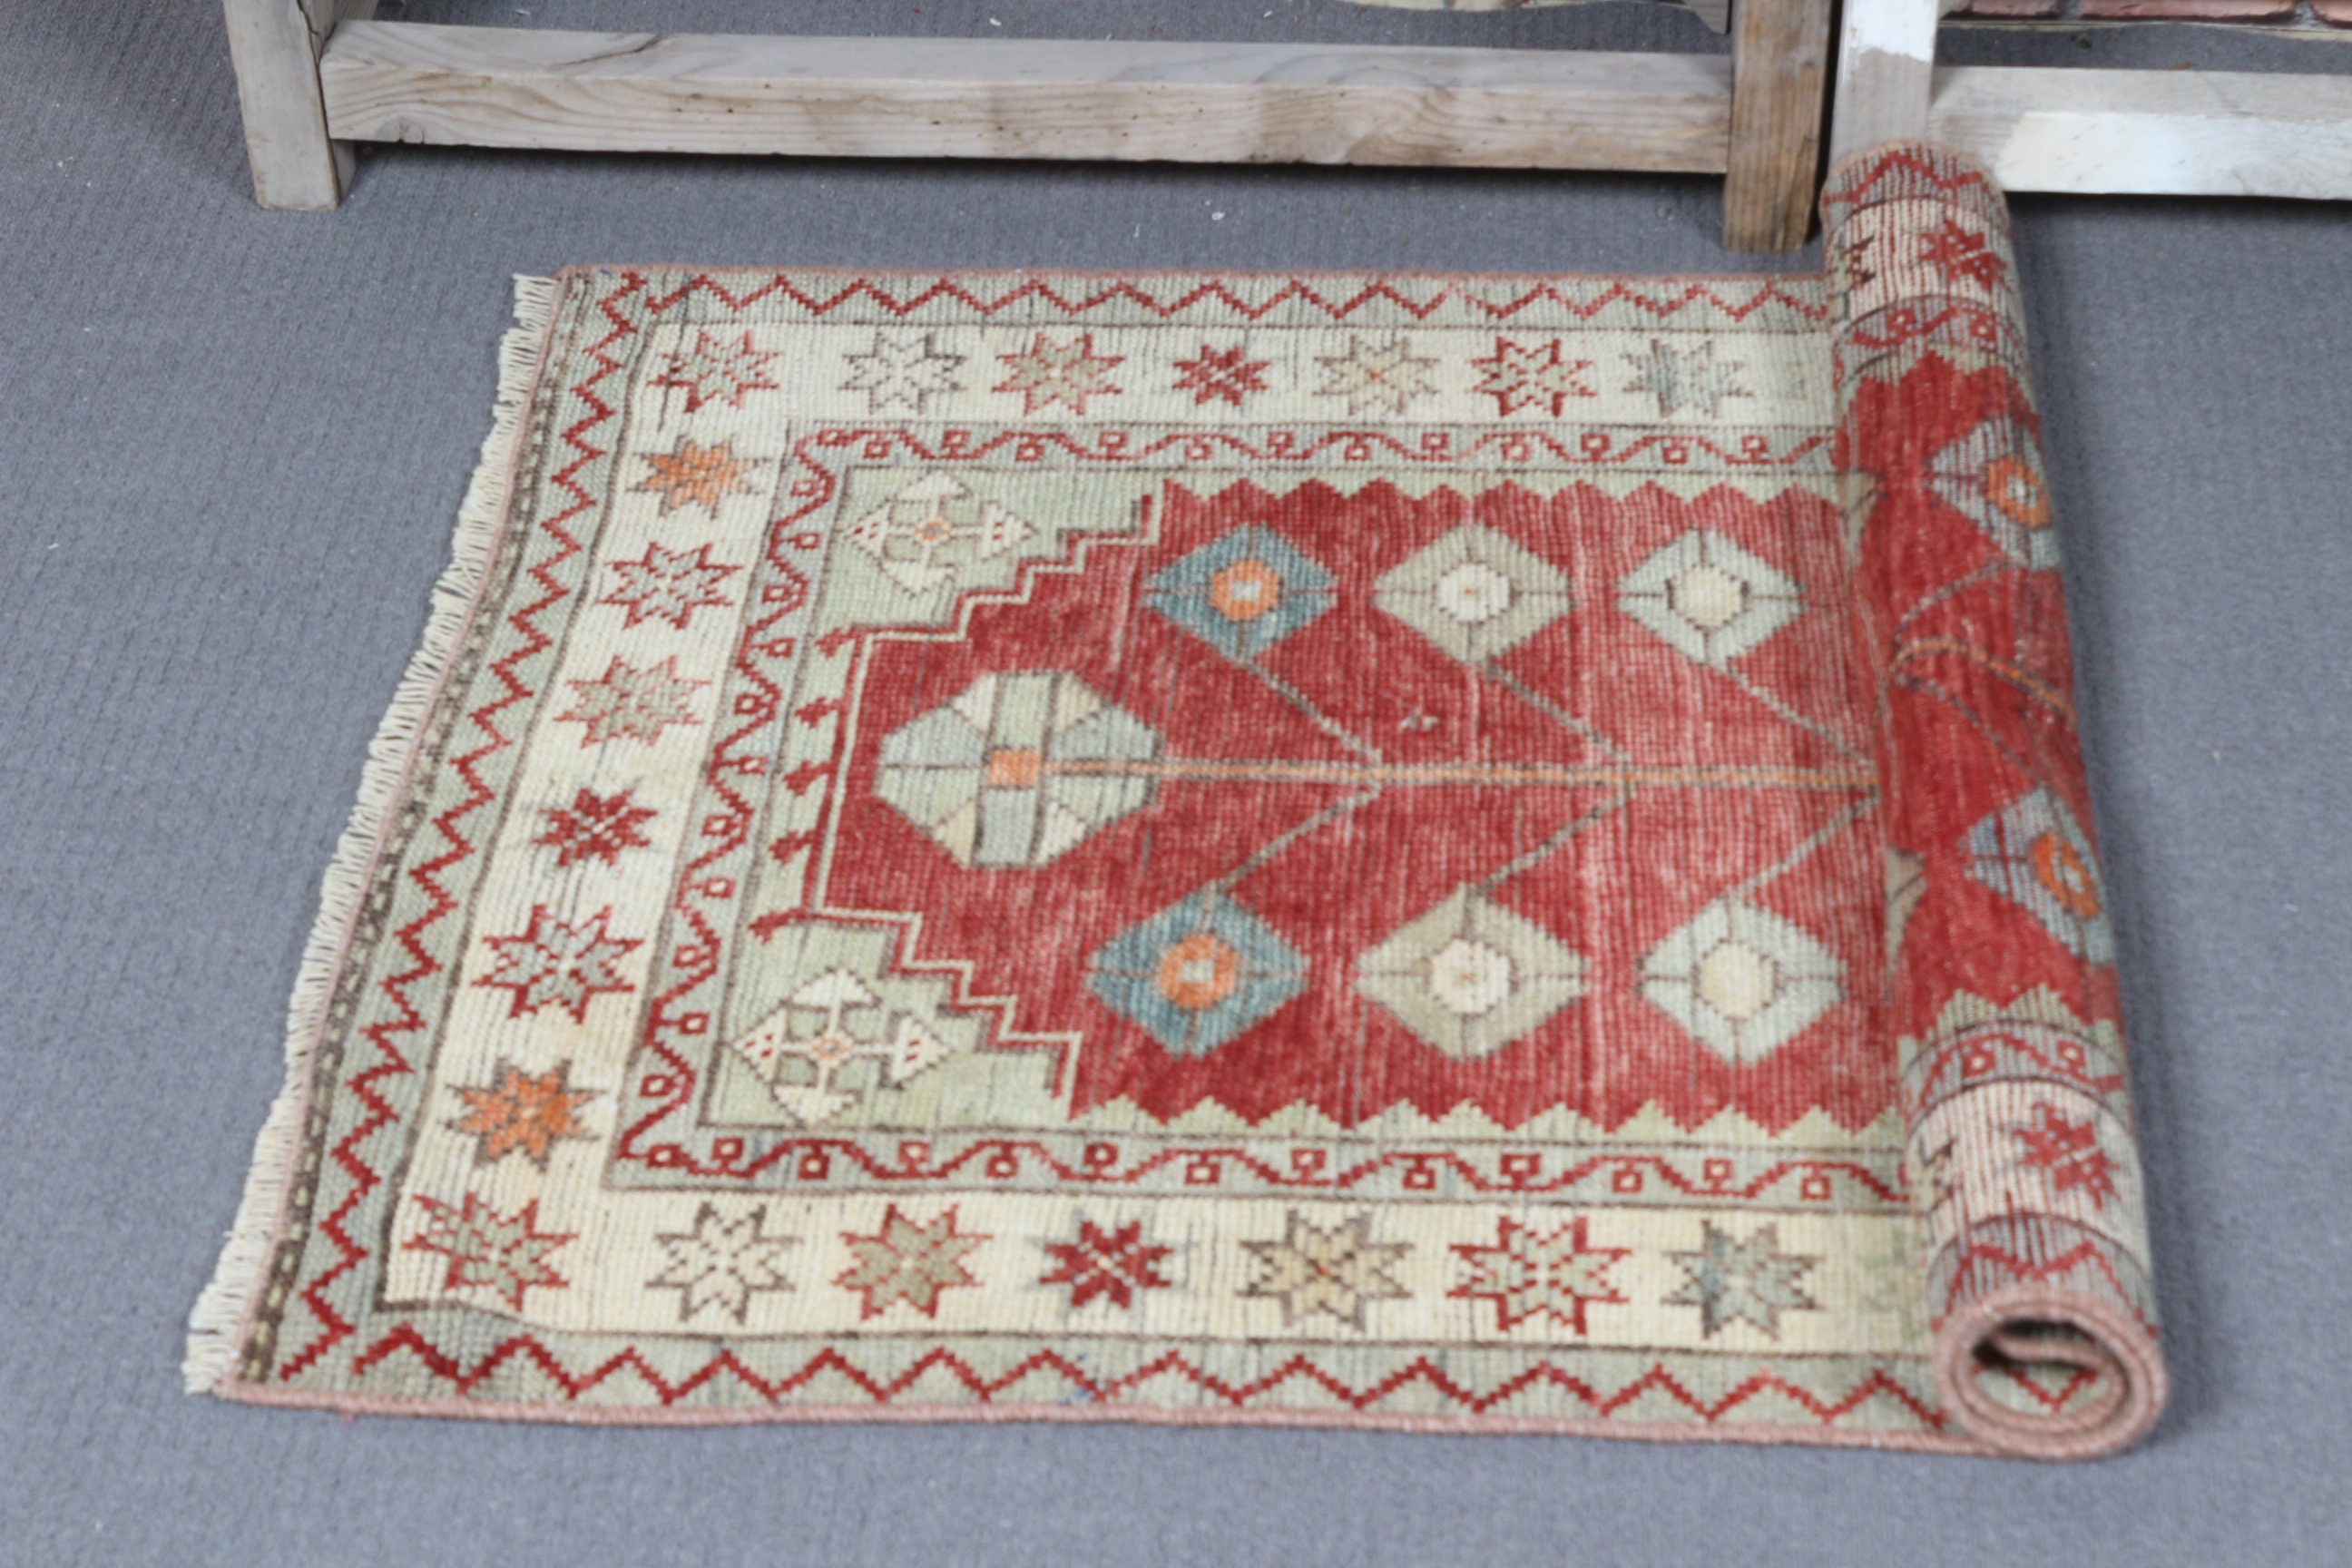 Red  2.7x4.1 ft Small Rug, Bath Rug, Turkish Rugs, Kitchen Rug, Vintage Rugs, Moroccan Rugs, Bath Mat Cute Rug, Entry Rugs